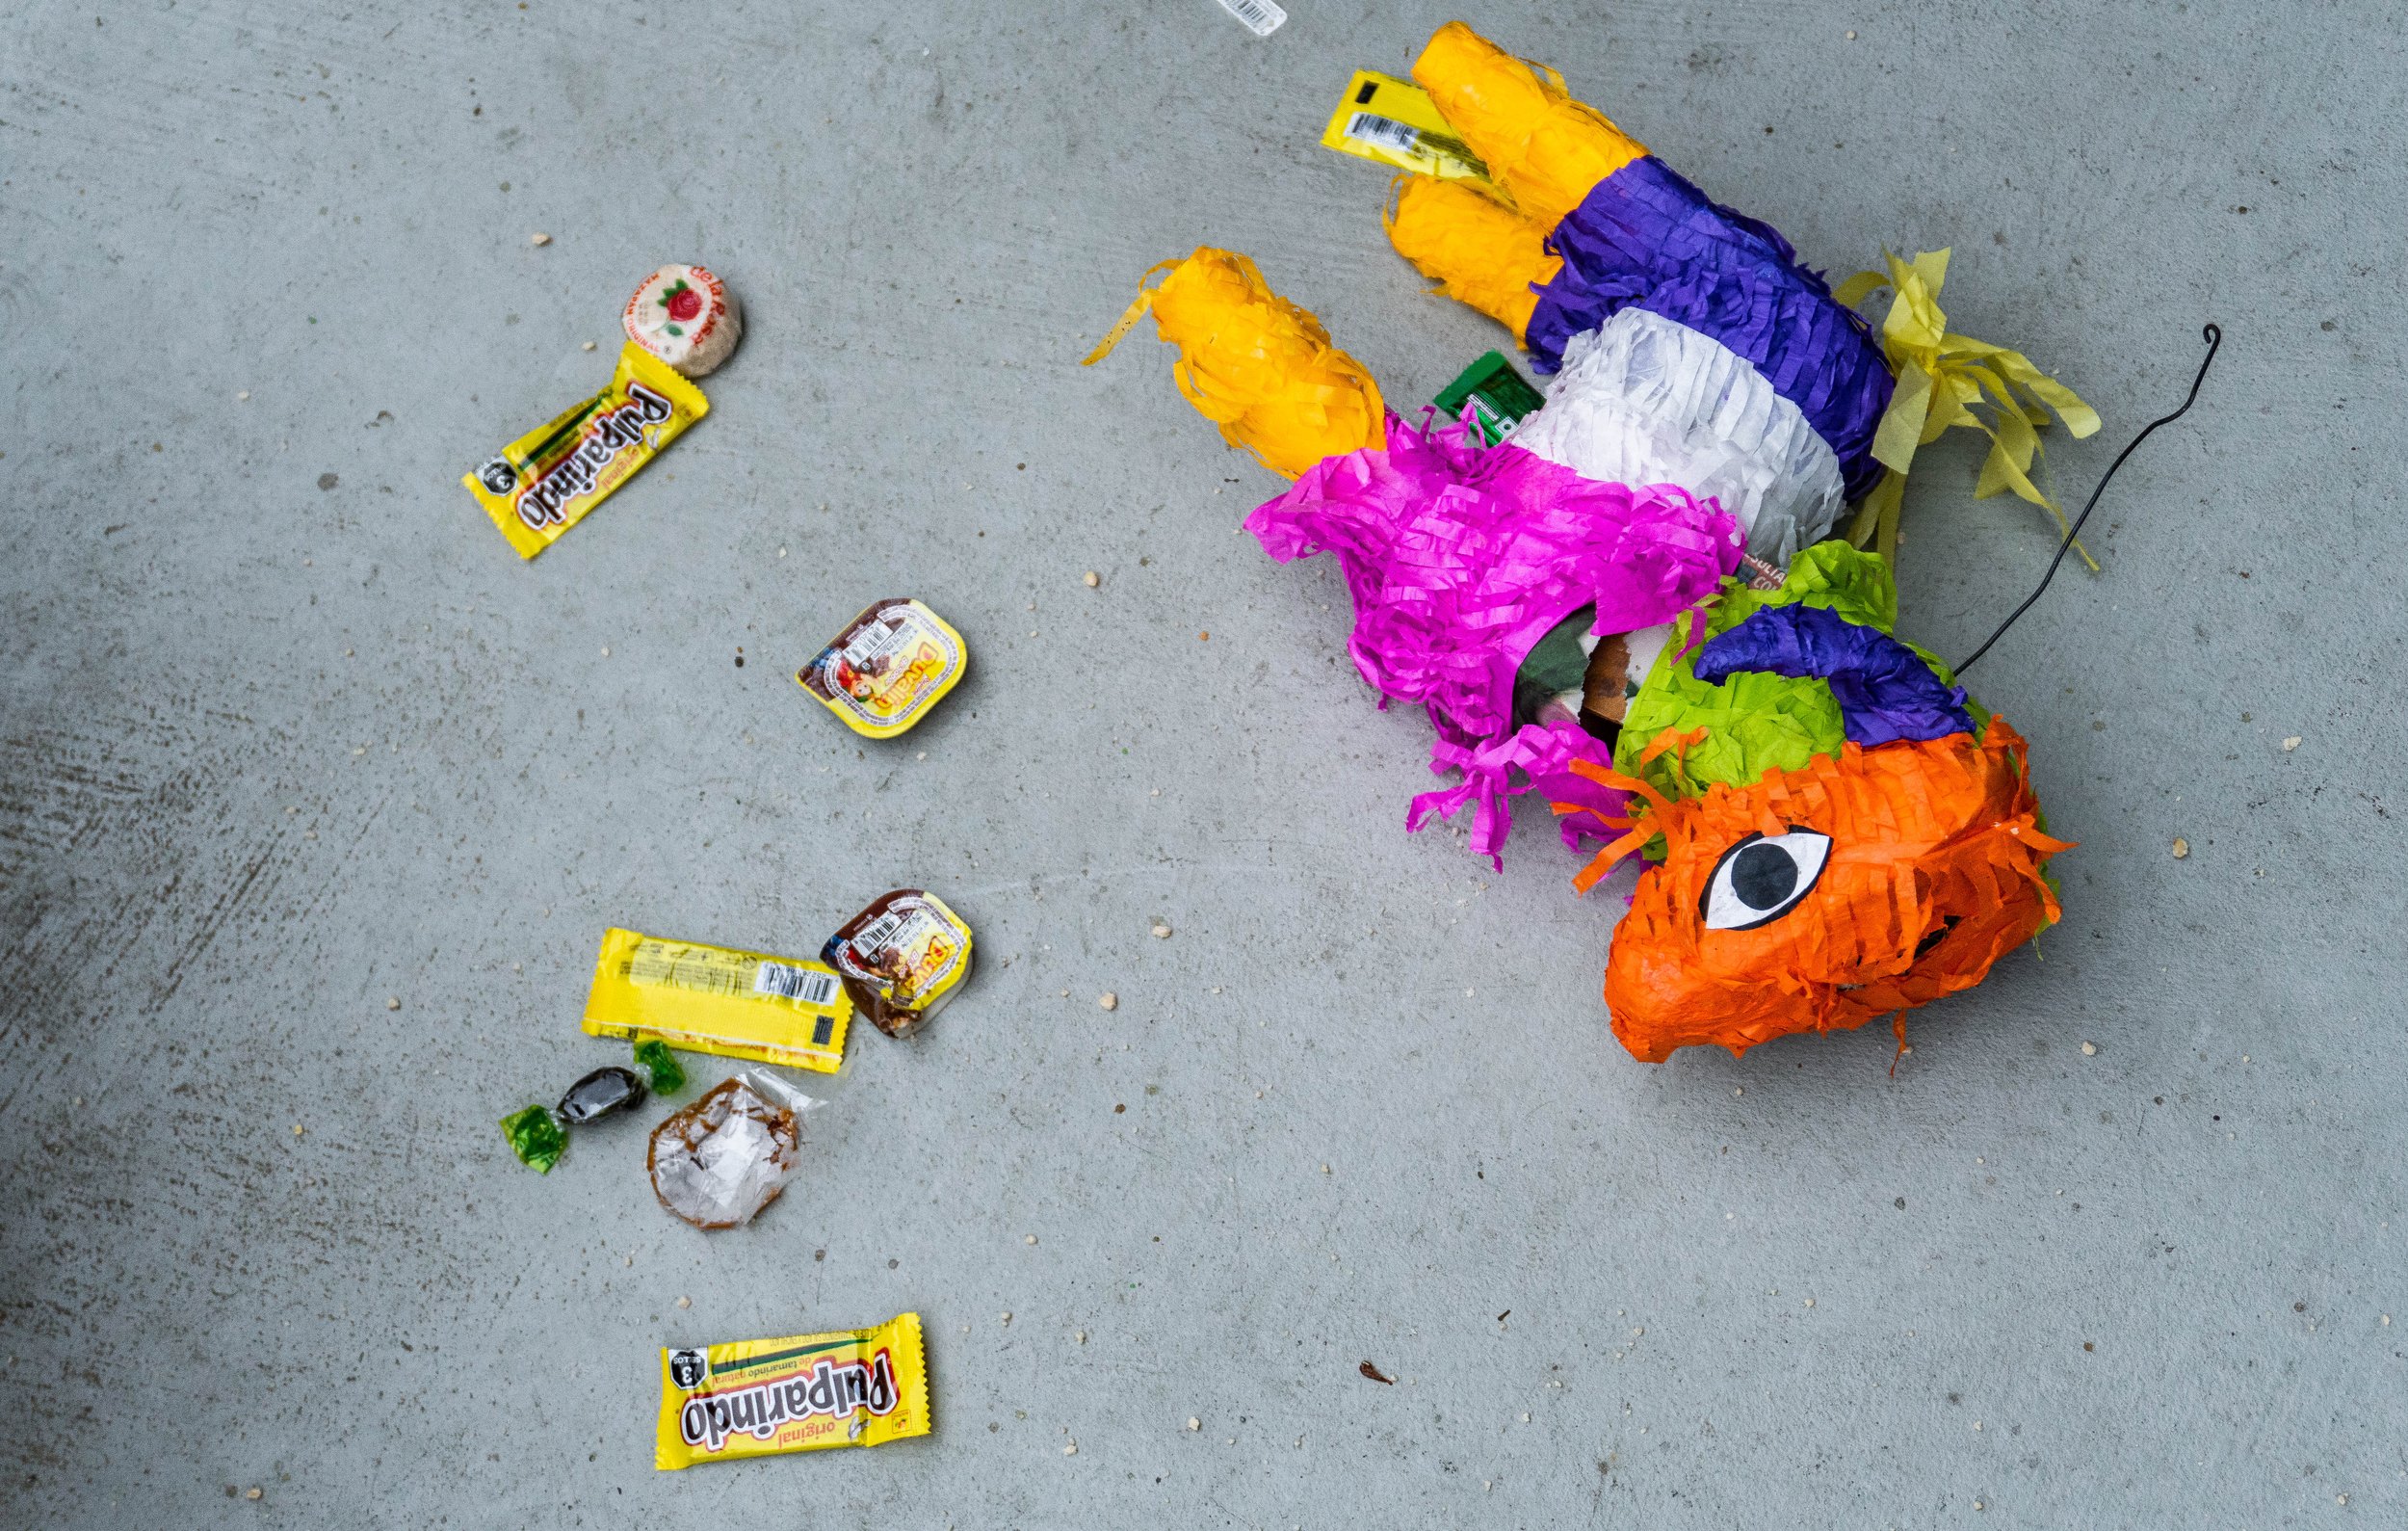  After rounds of being smashed, the piñata showers the floor with well-known Mexican treats like Pulparindo and Duvalin during  Snacks Appreication Day on Oct. 5, 2022. The event was organized by the Santa Monica College International Student Forum i